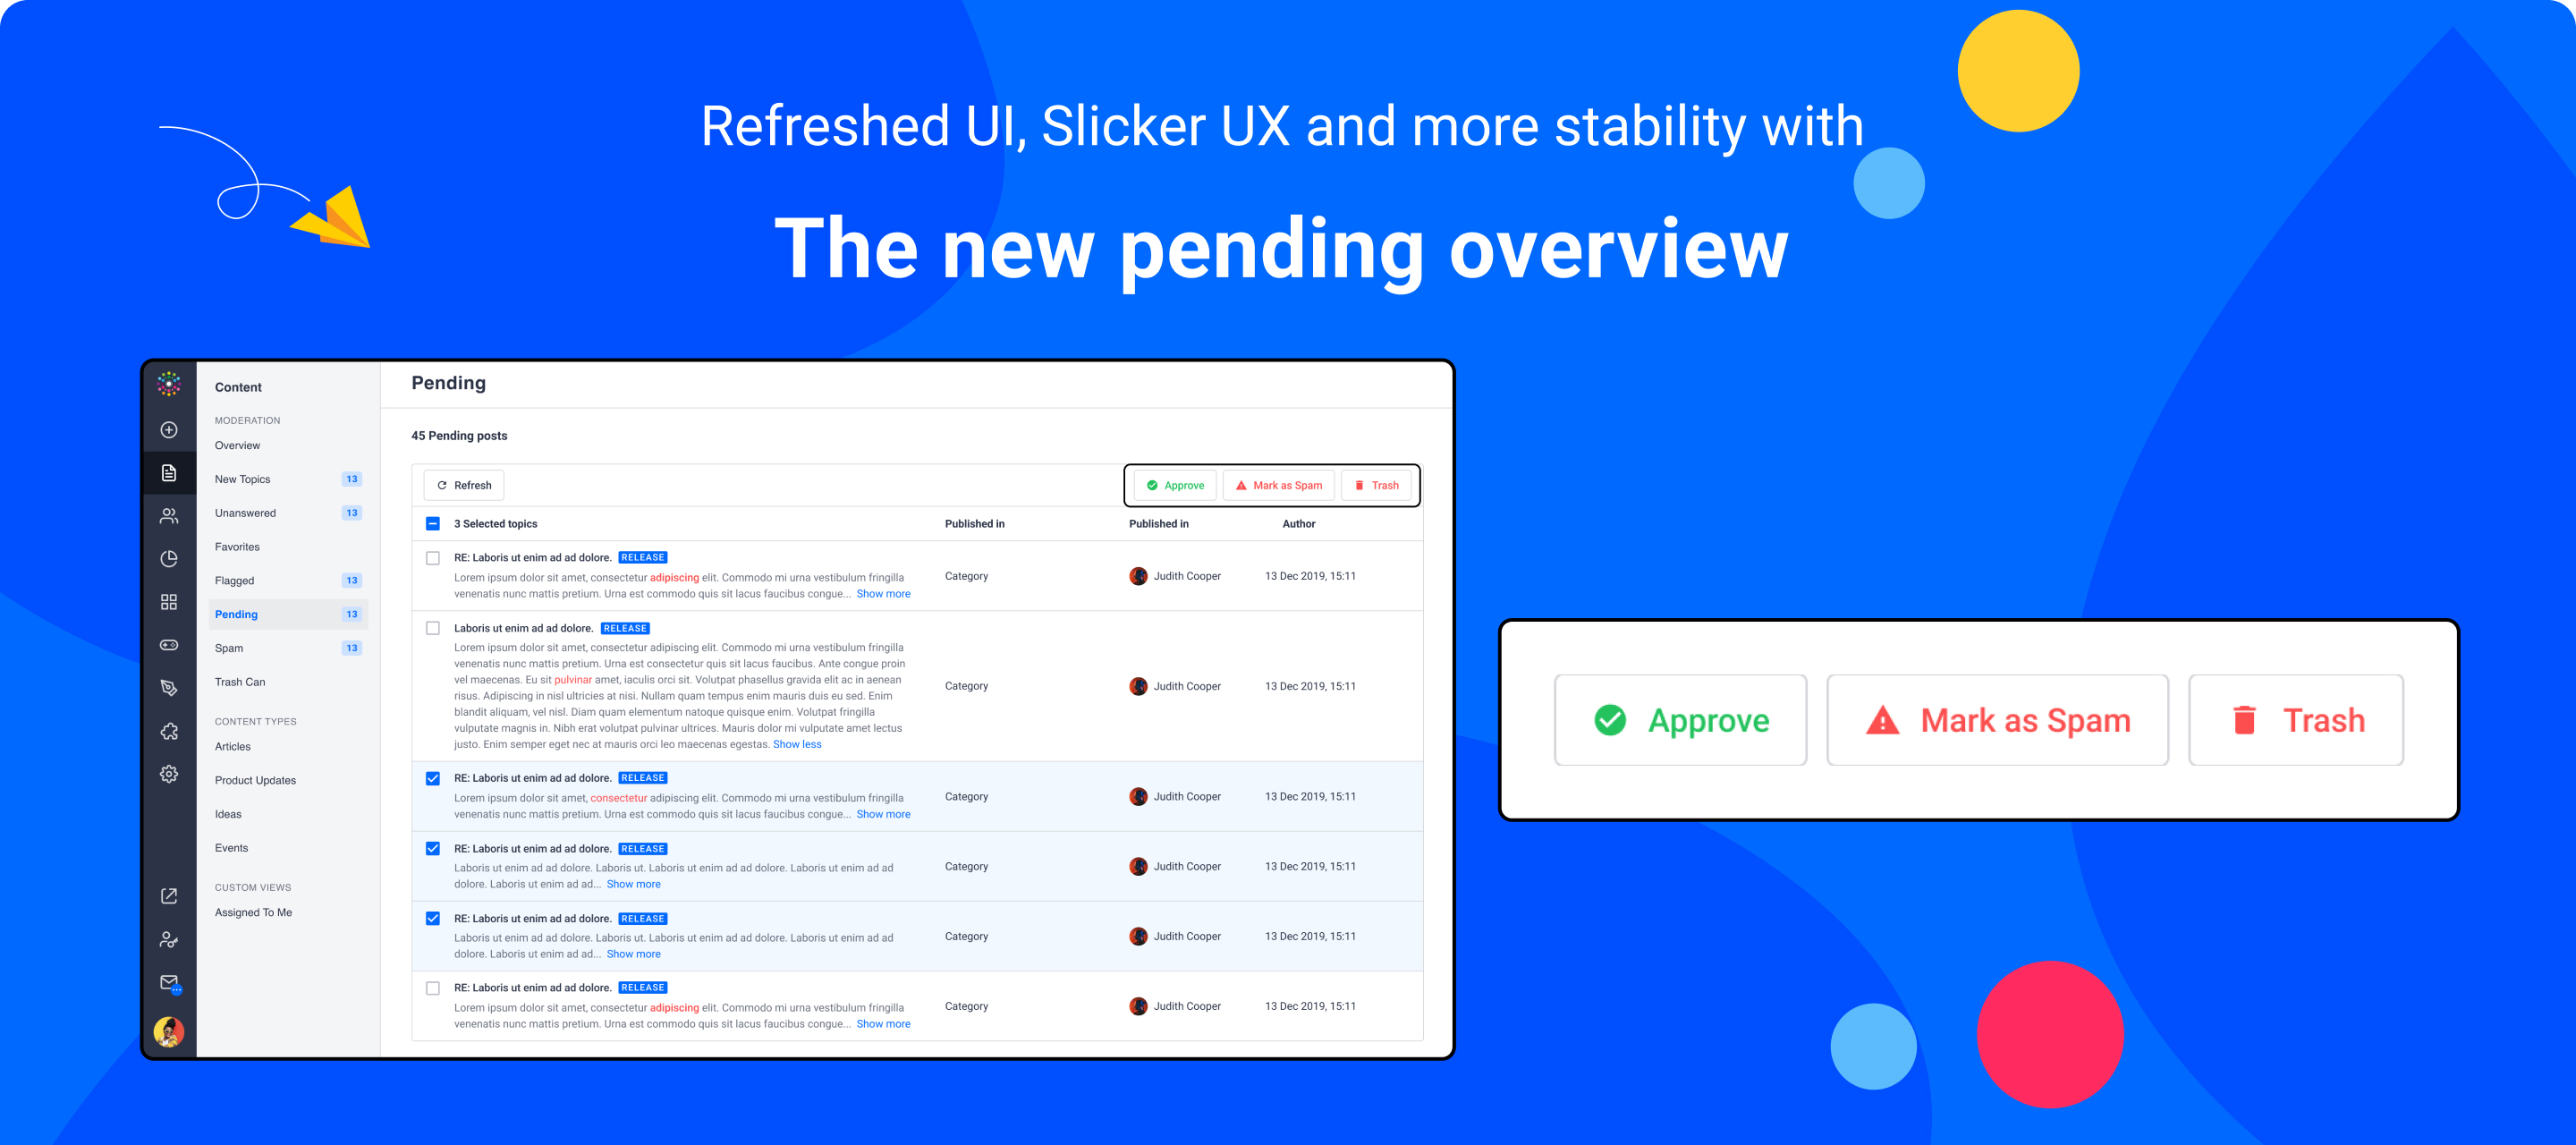 A brand new pending overview 🌟